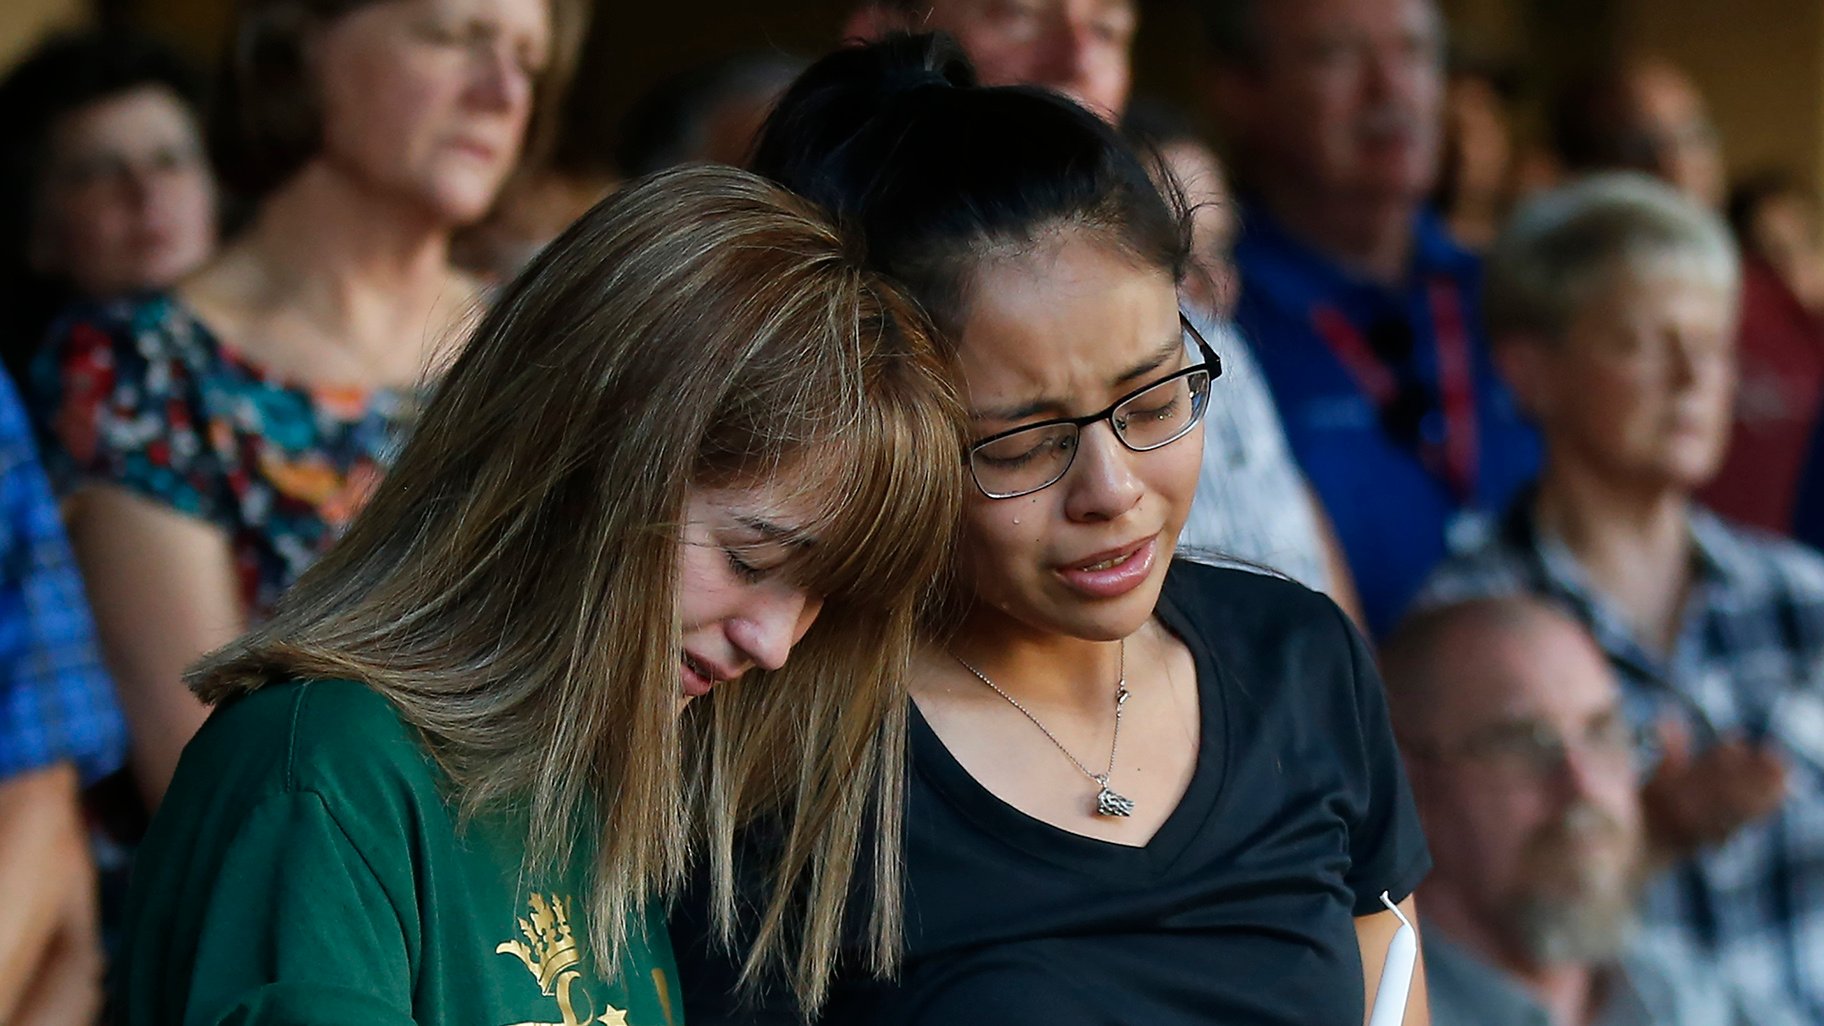 FBI: West Texas Gunman ‘Was on a Long Spiral of Going Down’ | Chicago ...